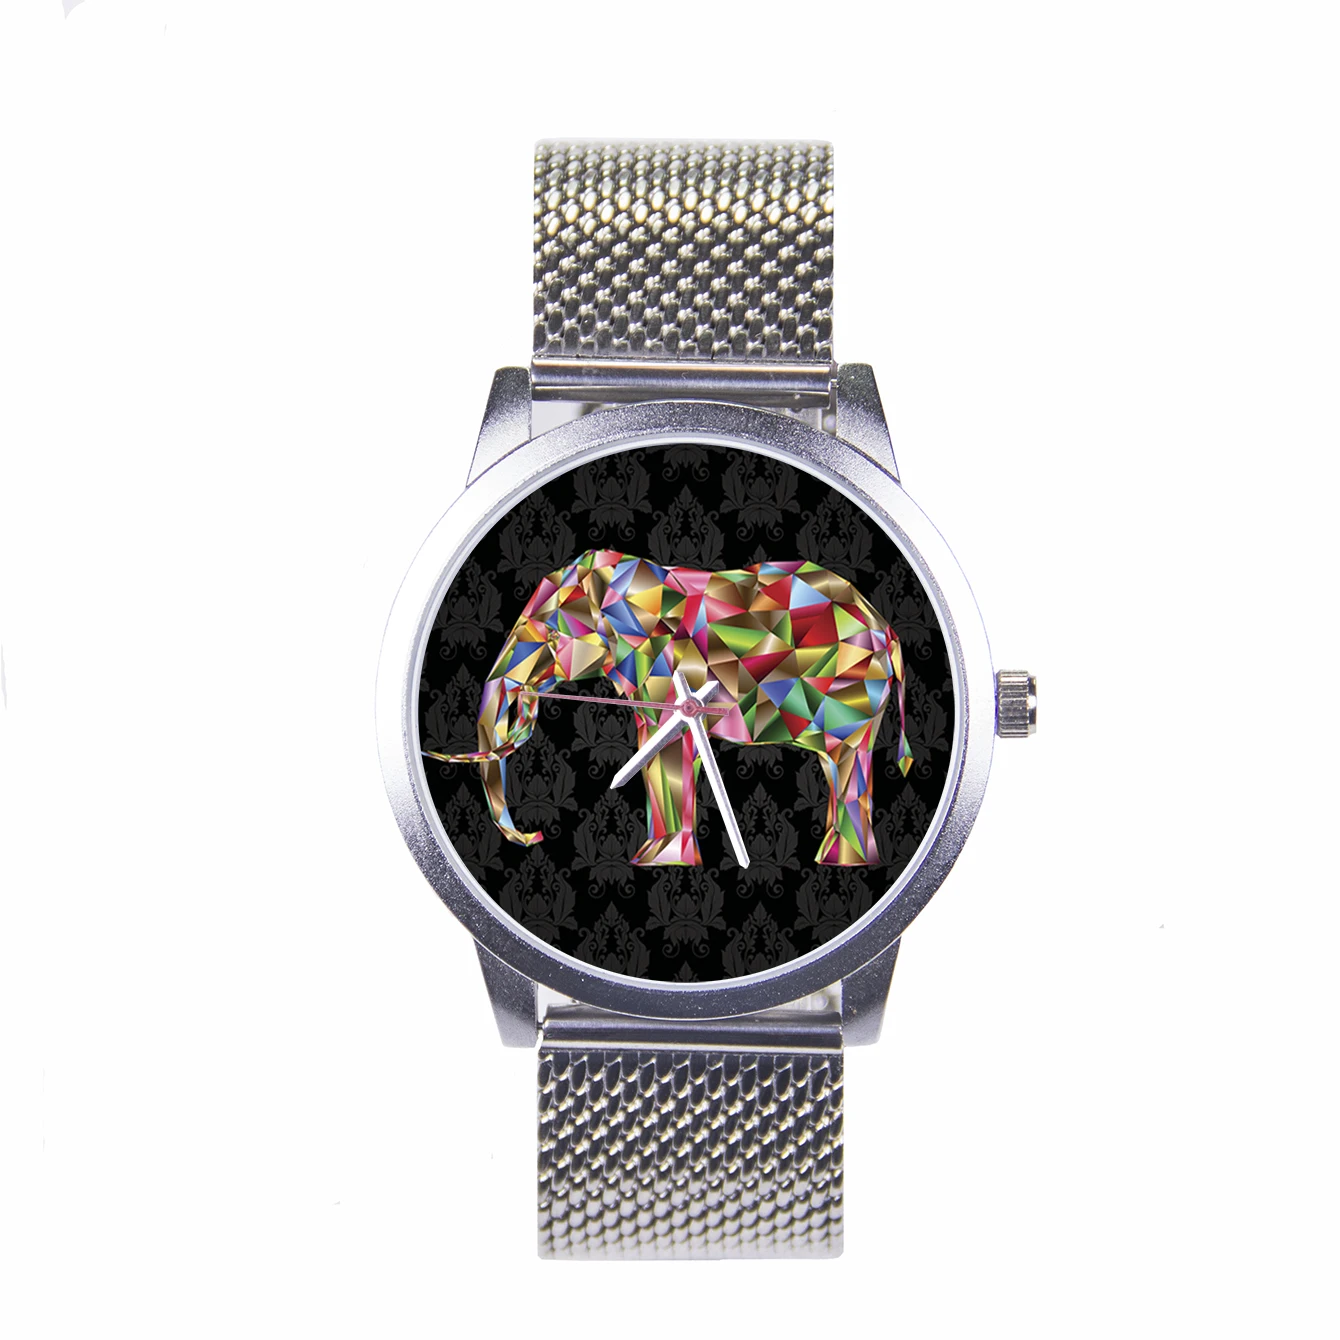 

Silver Case Quartz Watch Men Wrist Original Official Site Unique Gifts for Men Watch Free Shipping Individuality Elephant Choice